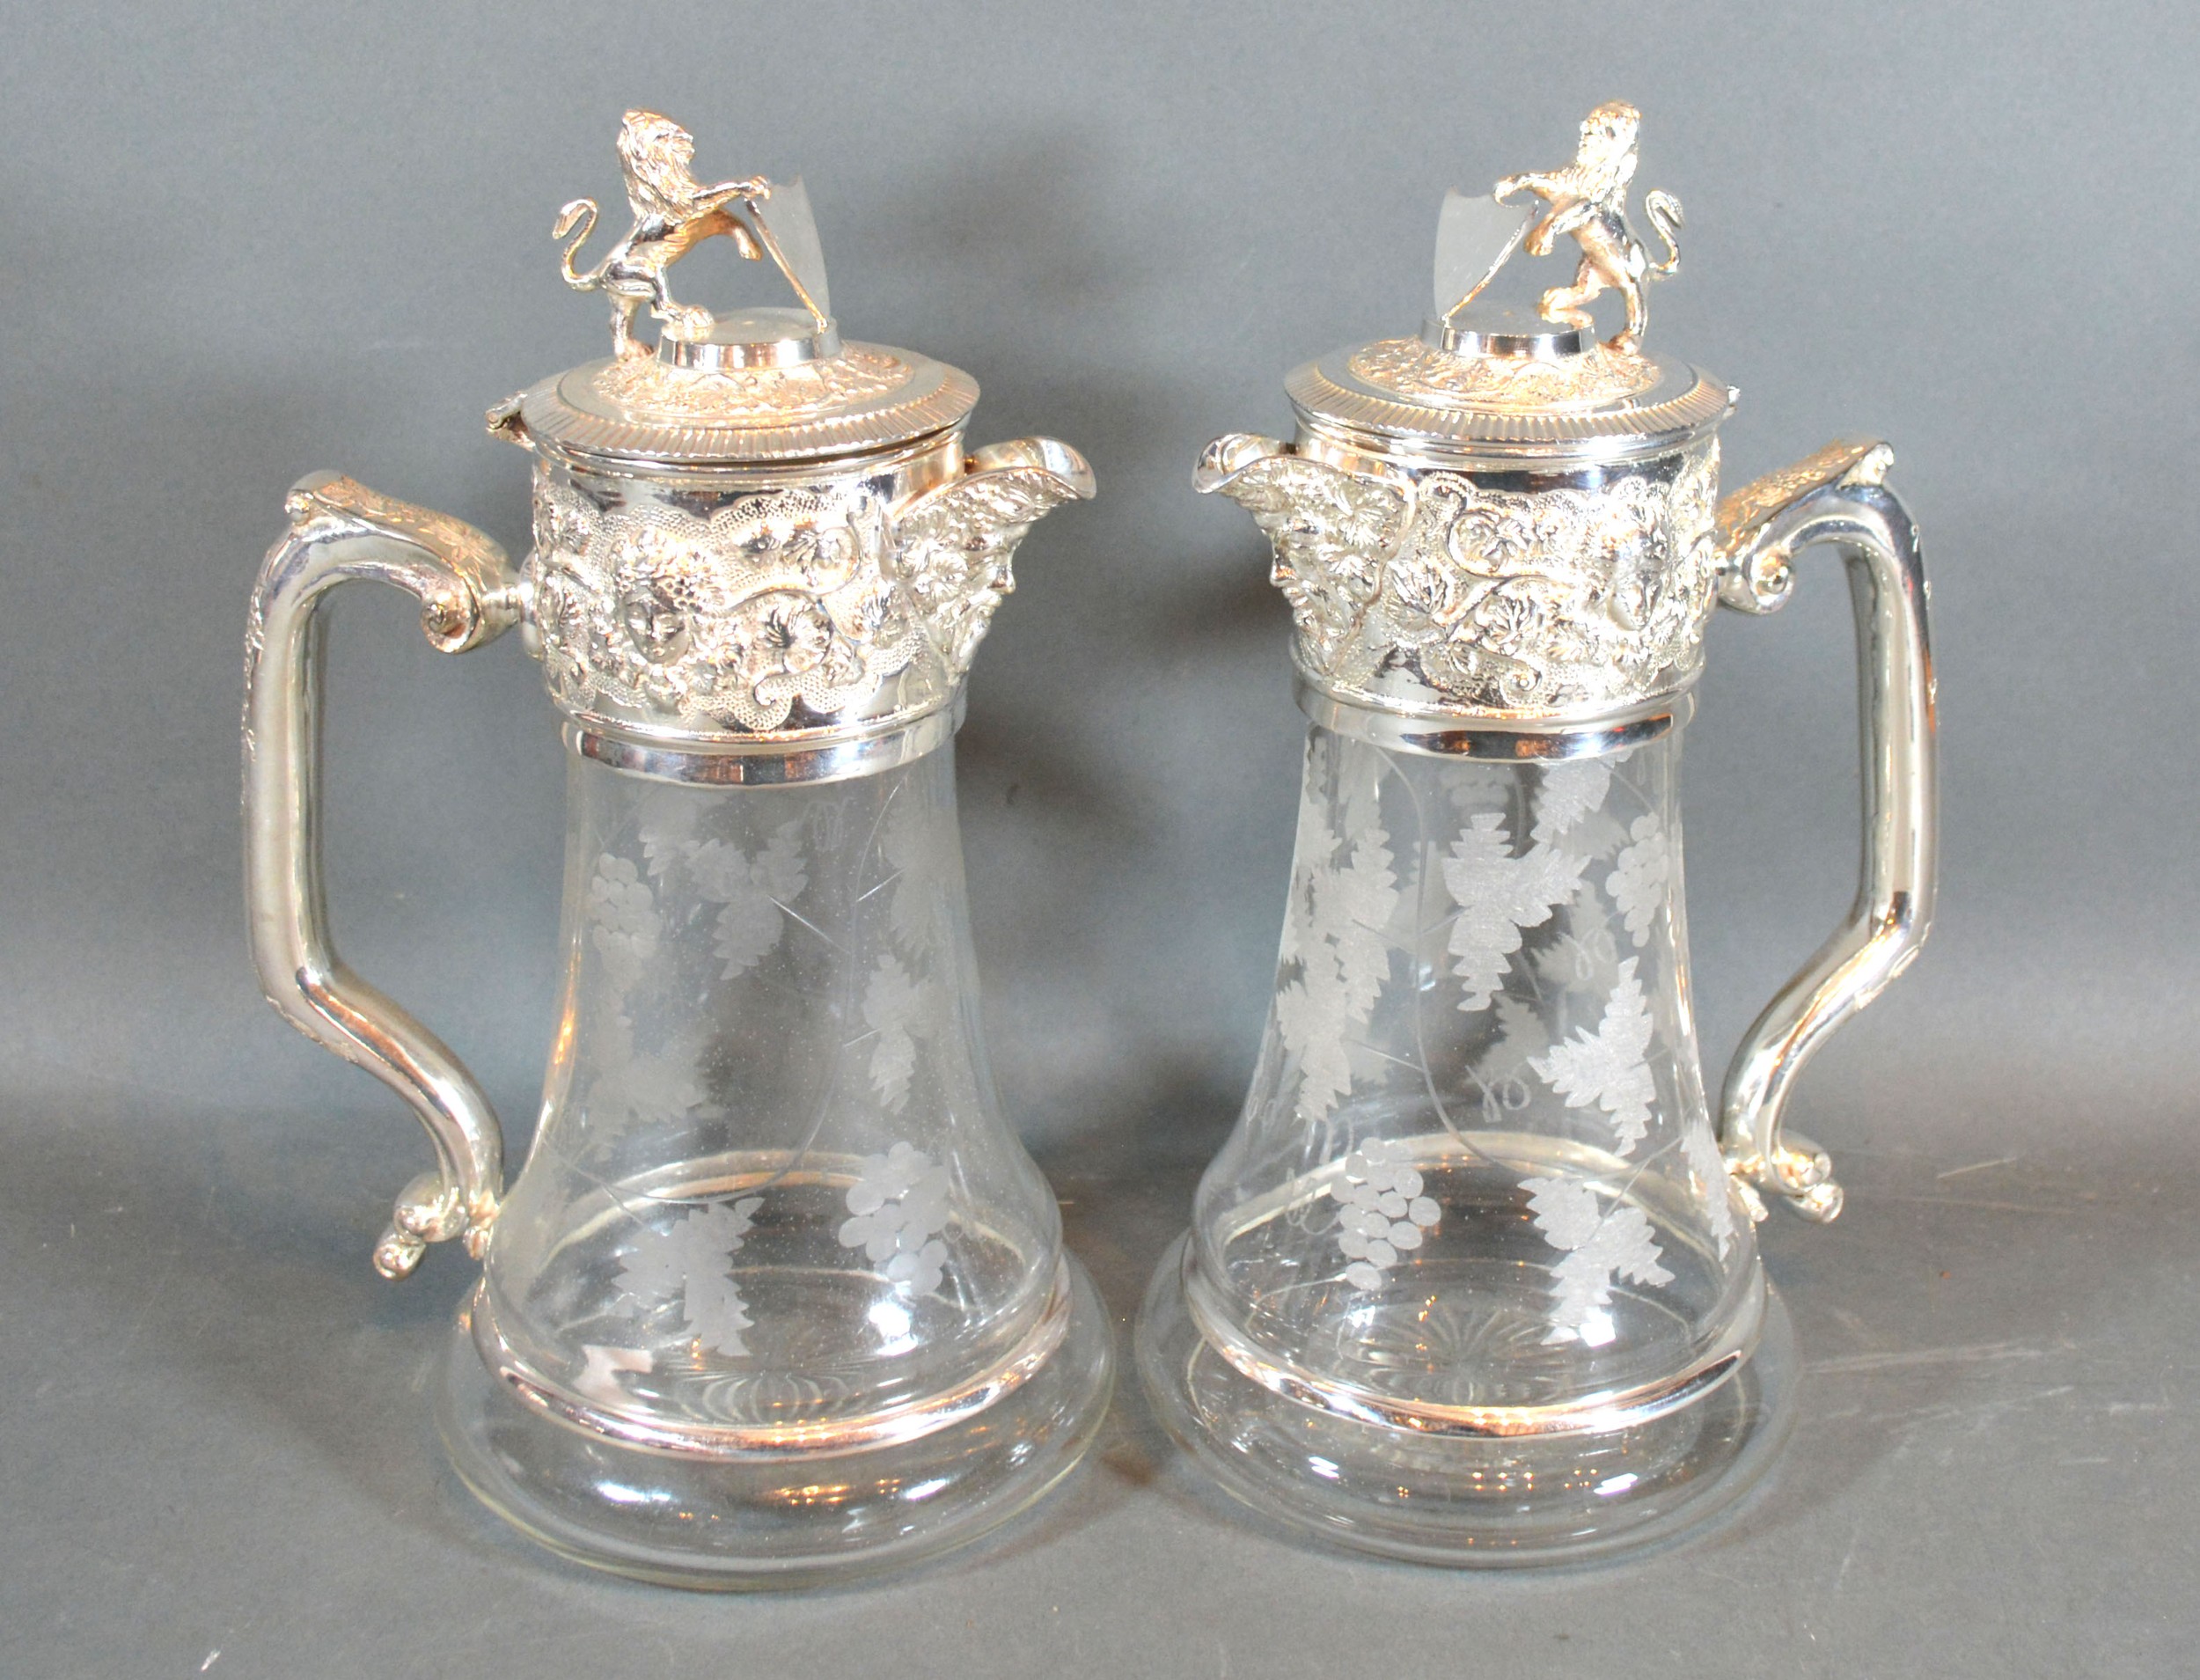 A Pair of Silver Plated and Engraved Glass Claret Jugs each with lion and shield mounts with